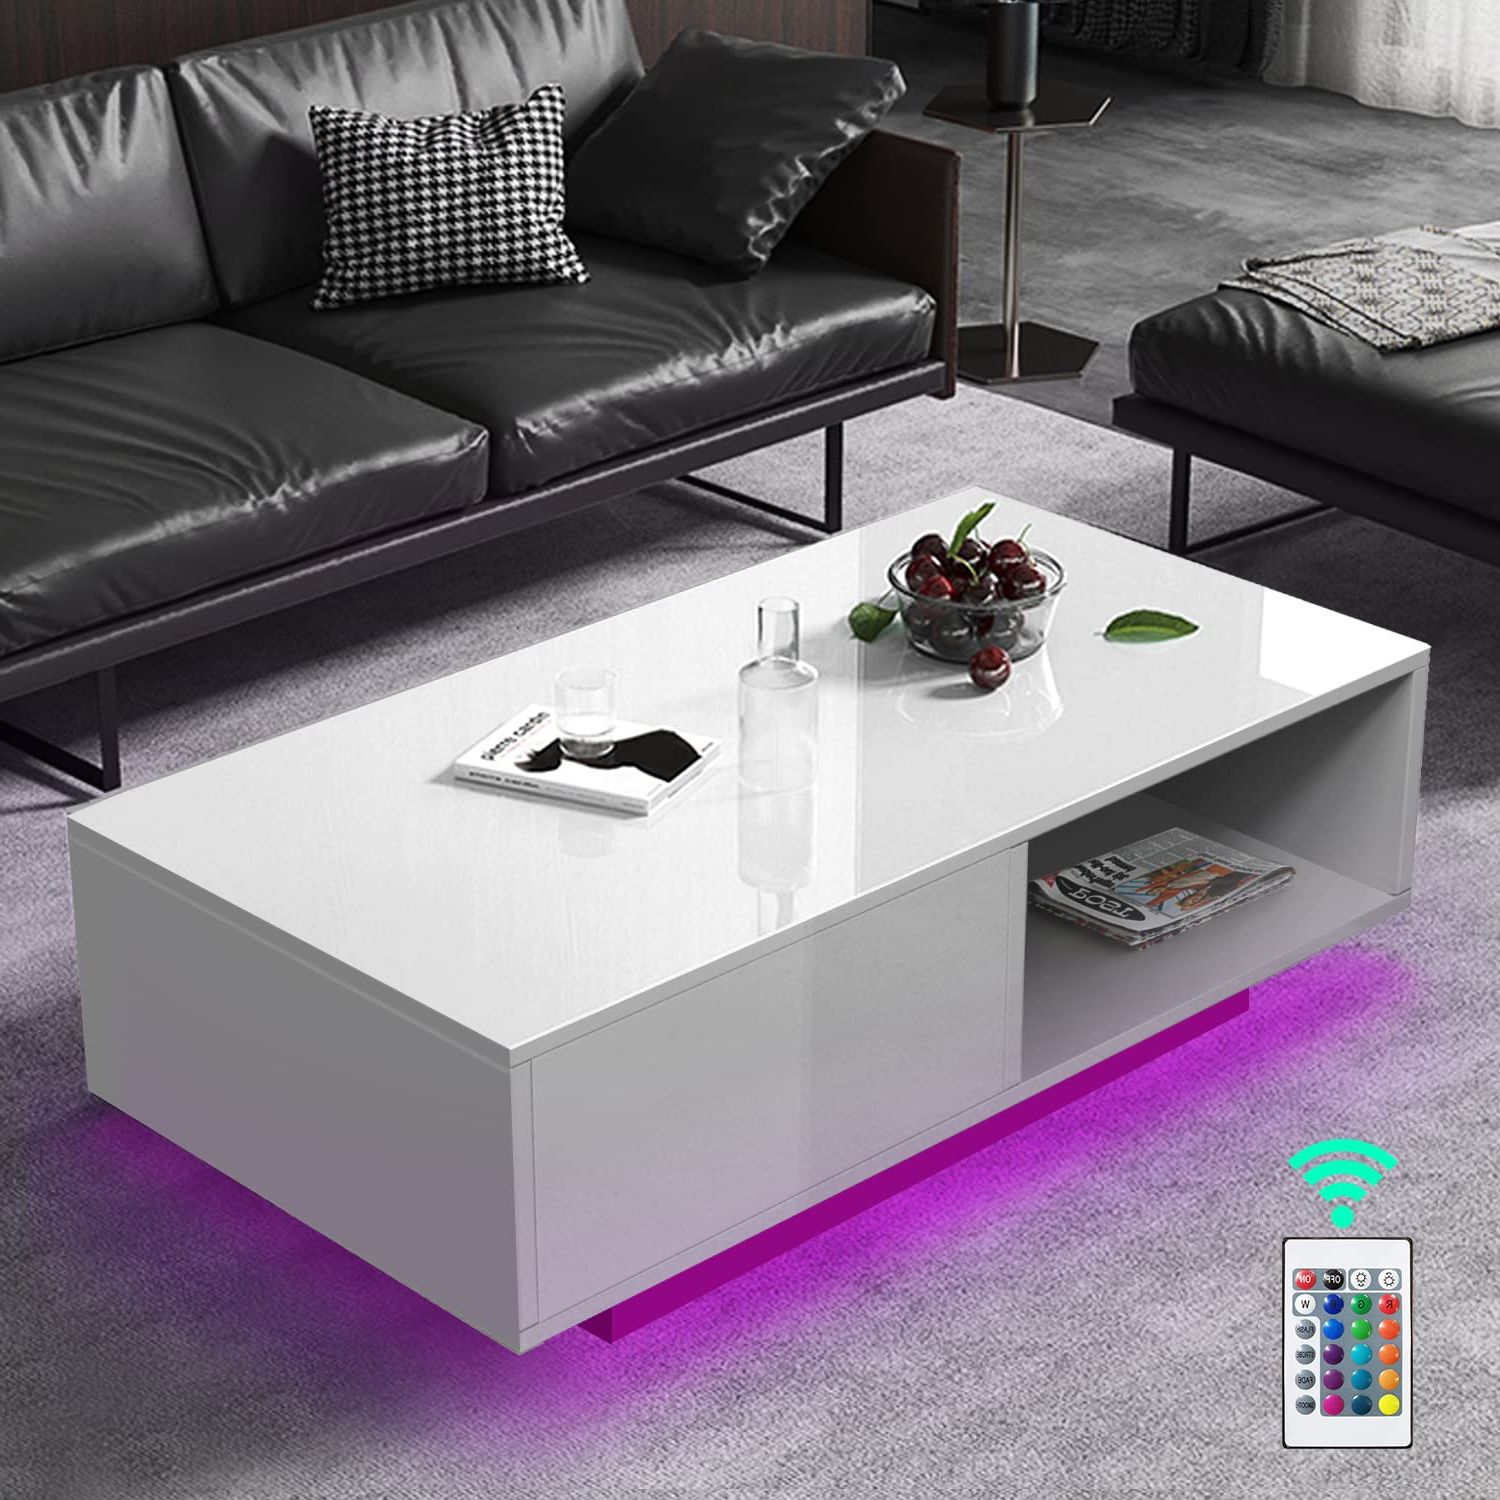 Led Coffee Tables With 4 Drawers Regarding 2020 【とめて】 特別価格coffee Table With Led Lights， Modern High Gloss Coffee Table (View 15 of 15)